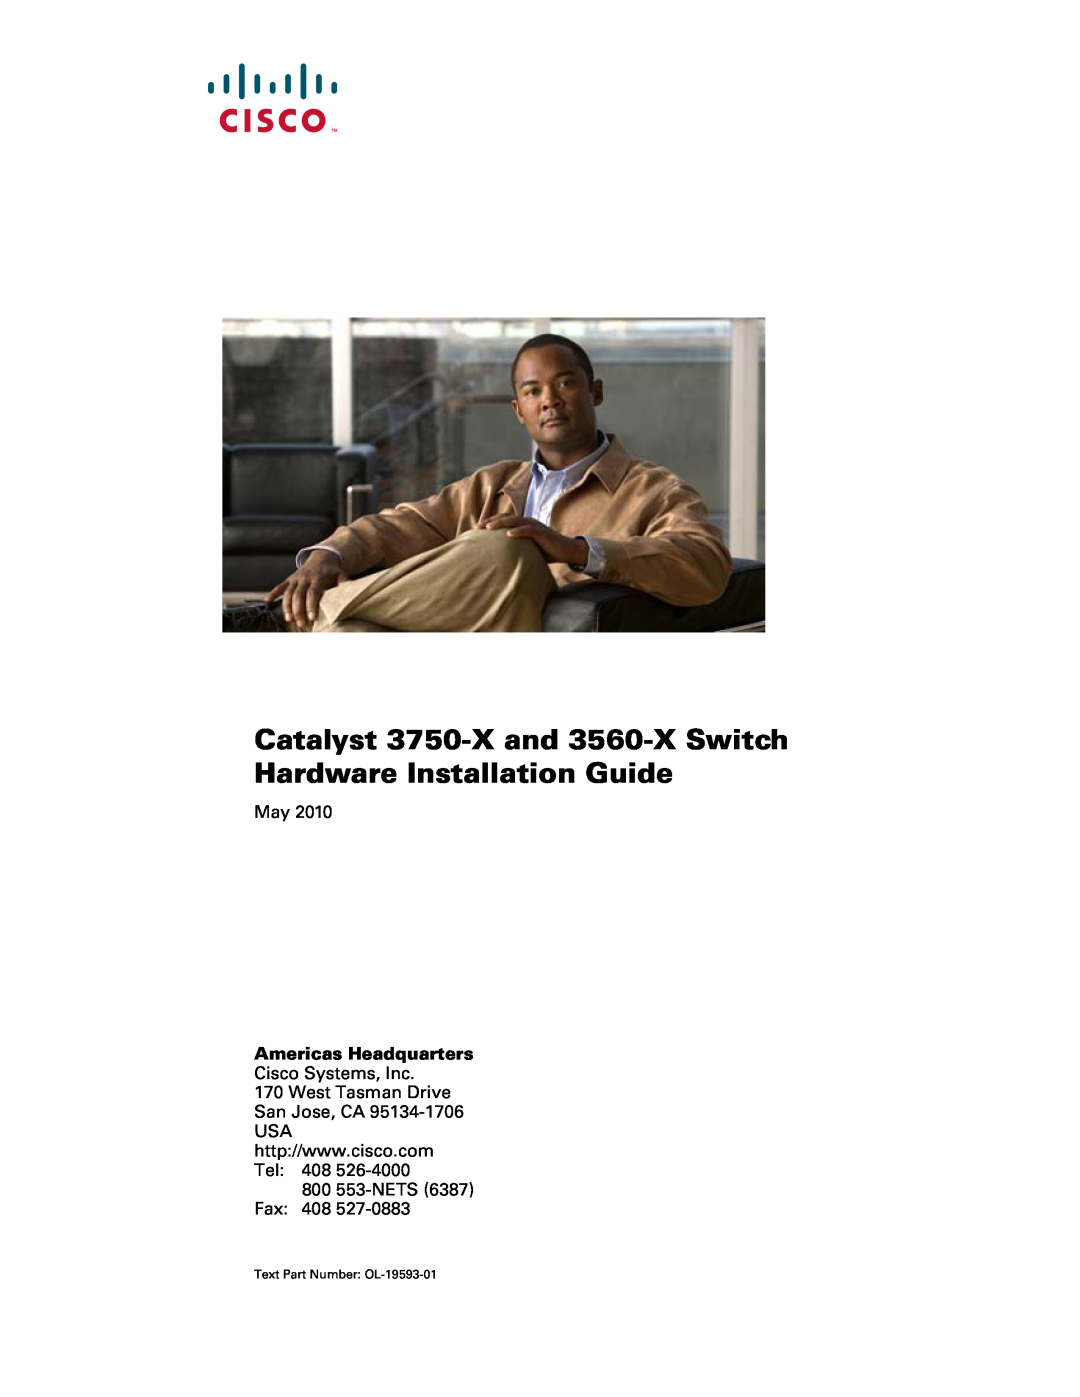 Cisco Systems manual Catalyst 3750-X and 3560-X Switch Hardware Installation Guide, Americas Headquarters 